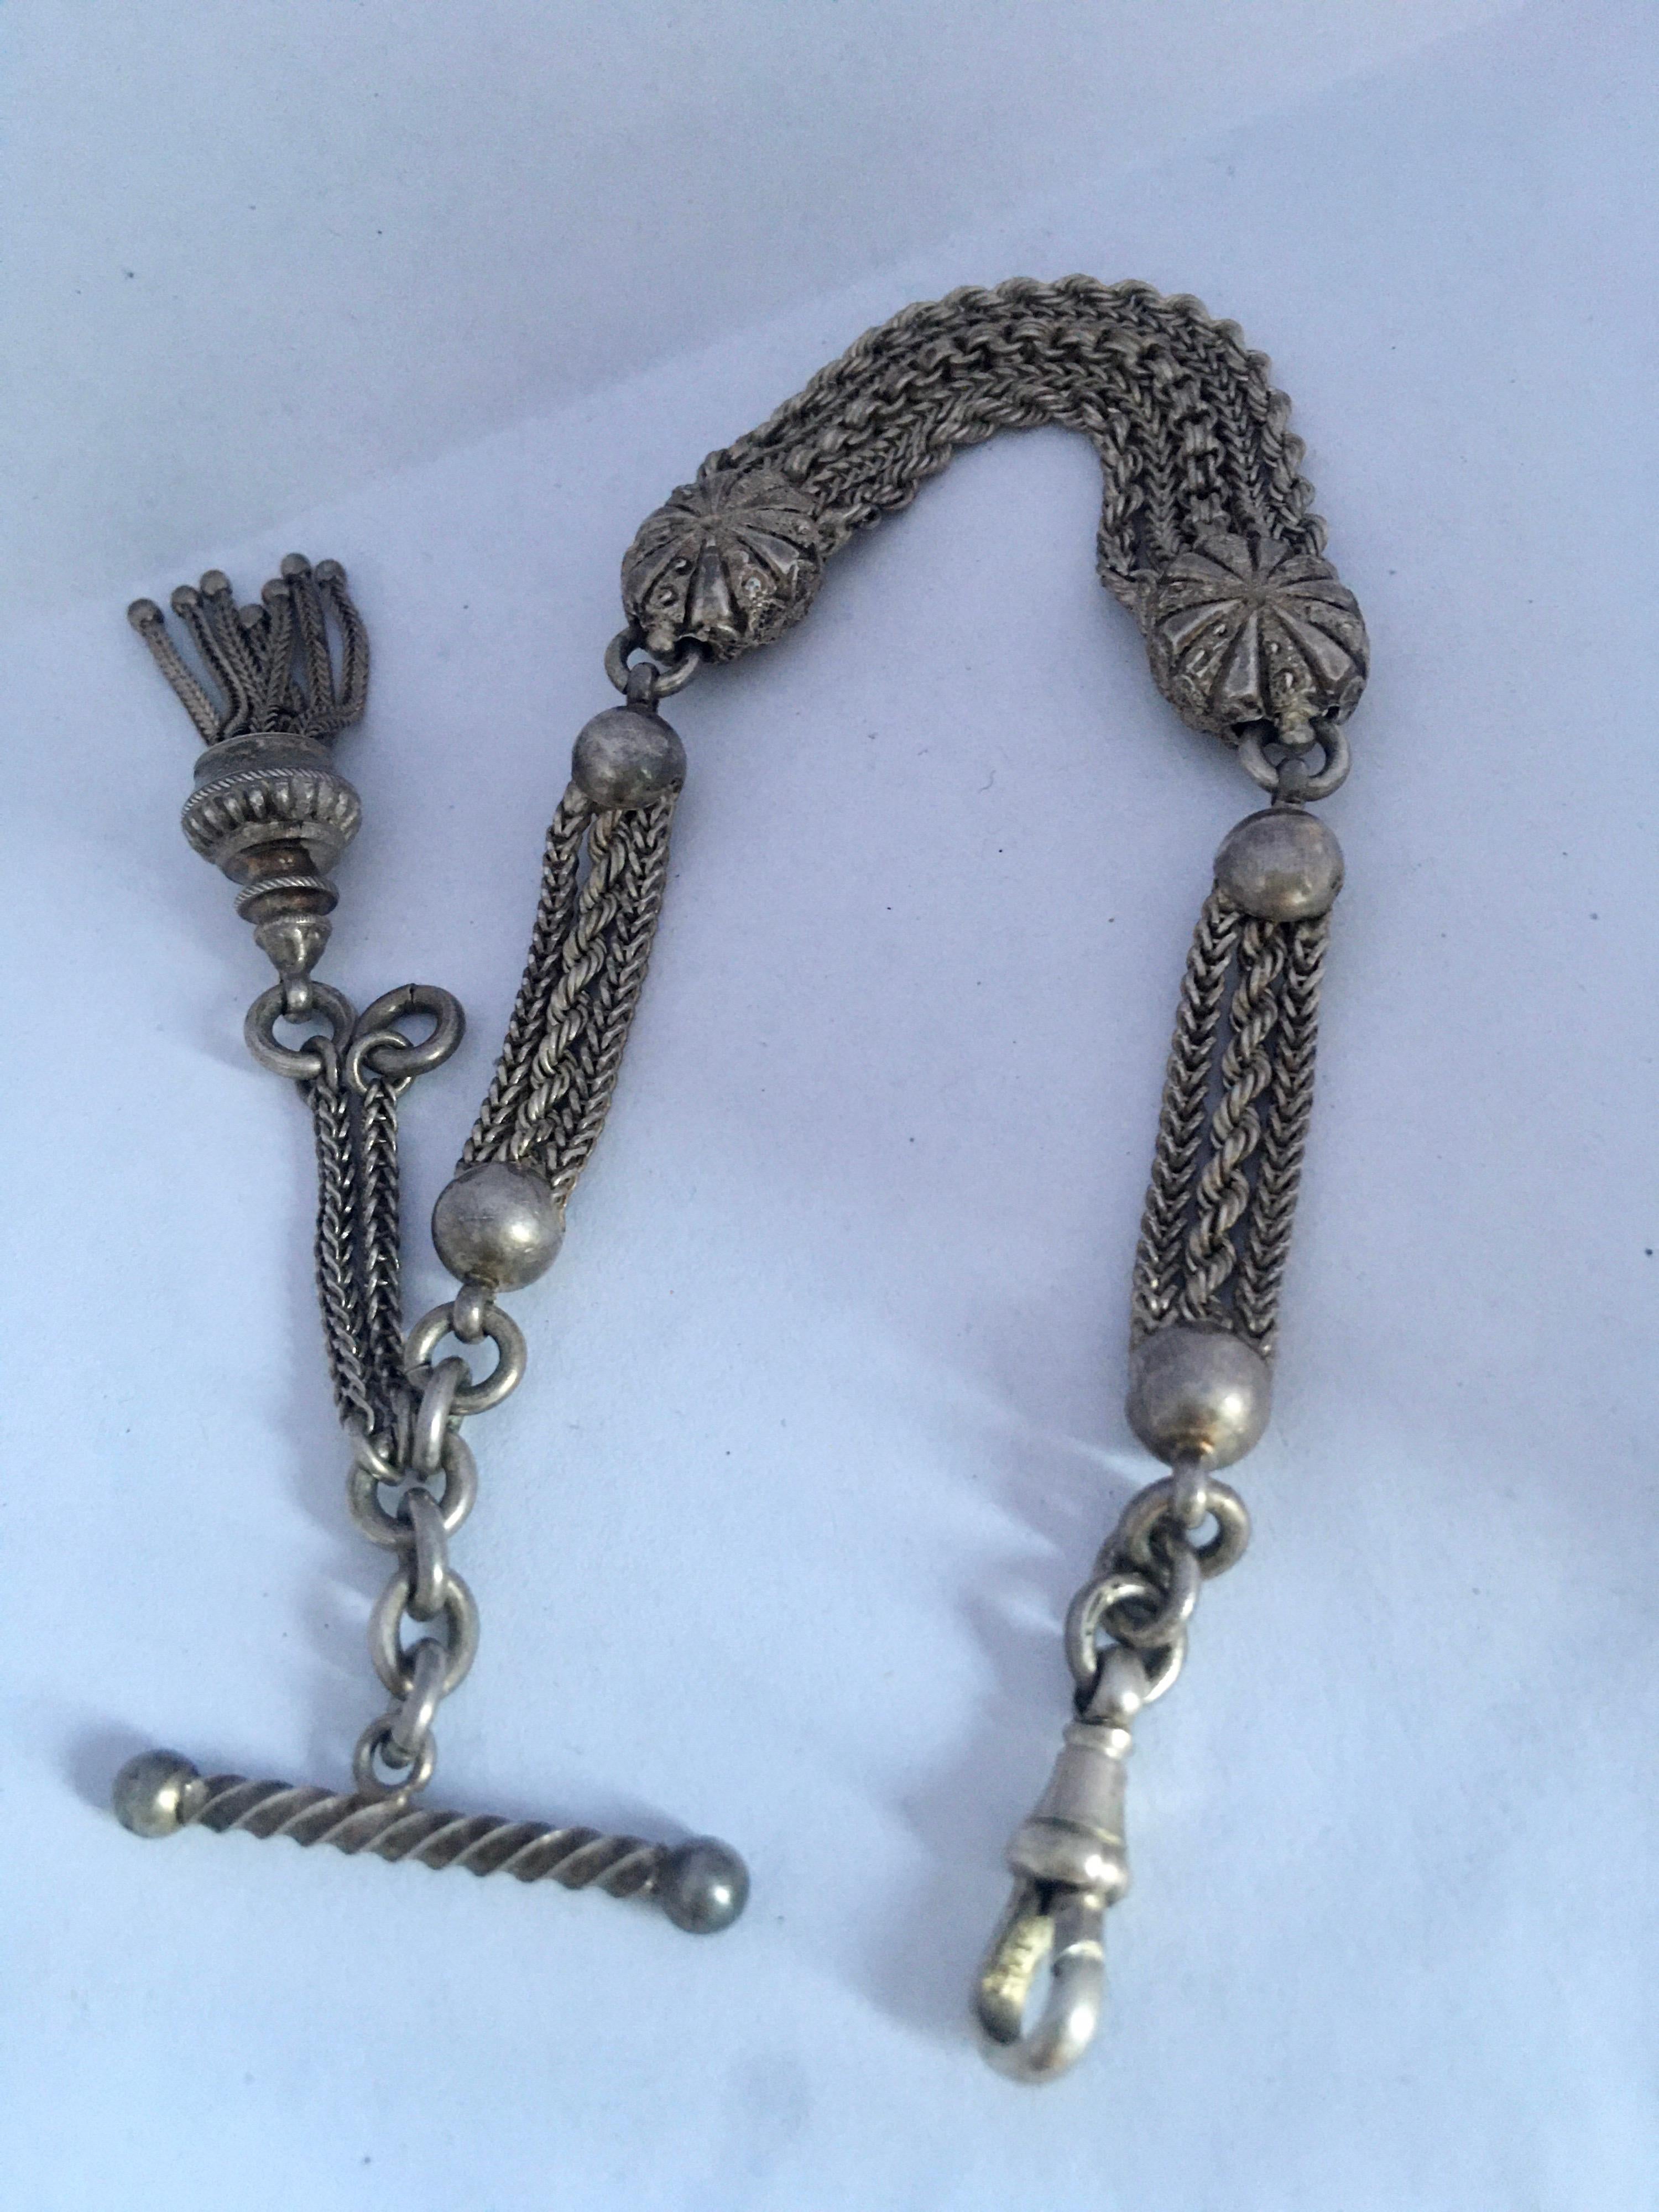 Antique Silver Ornate Pocket Watch Chain 1